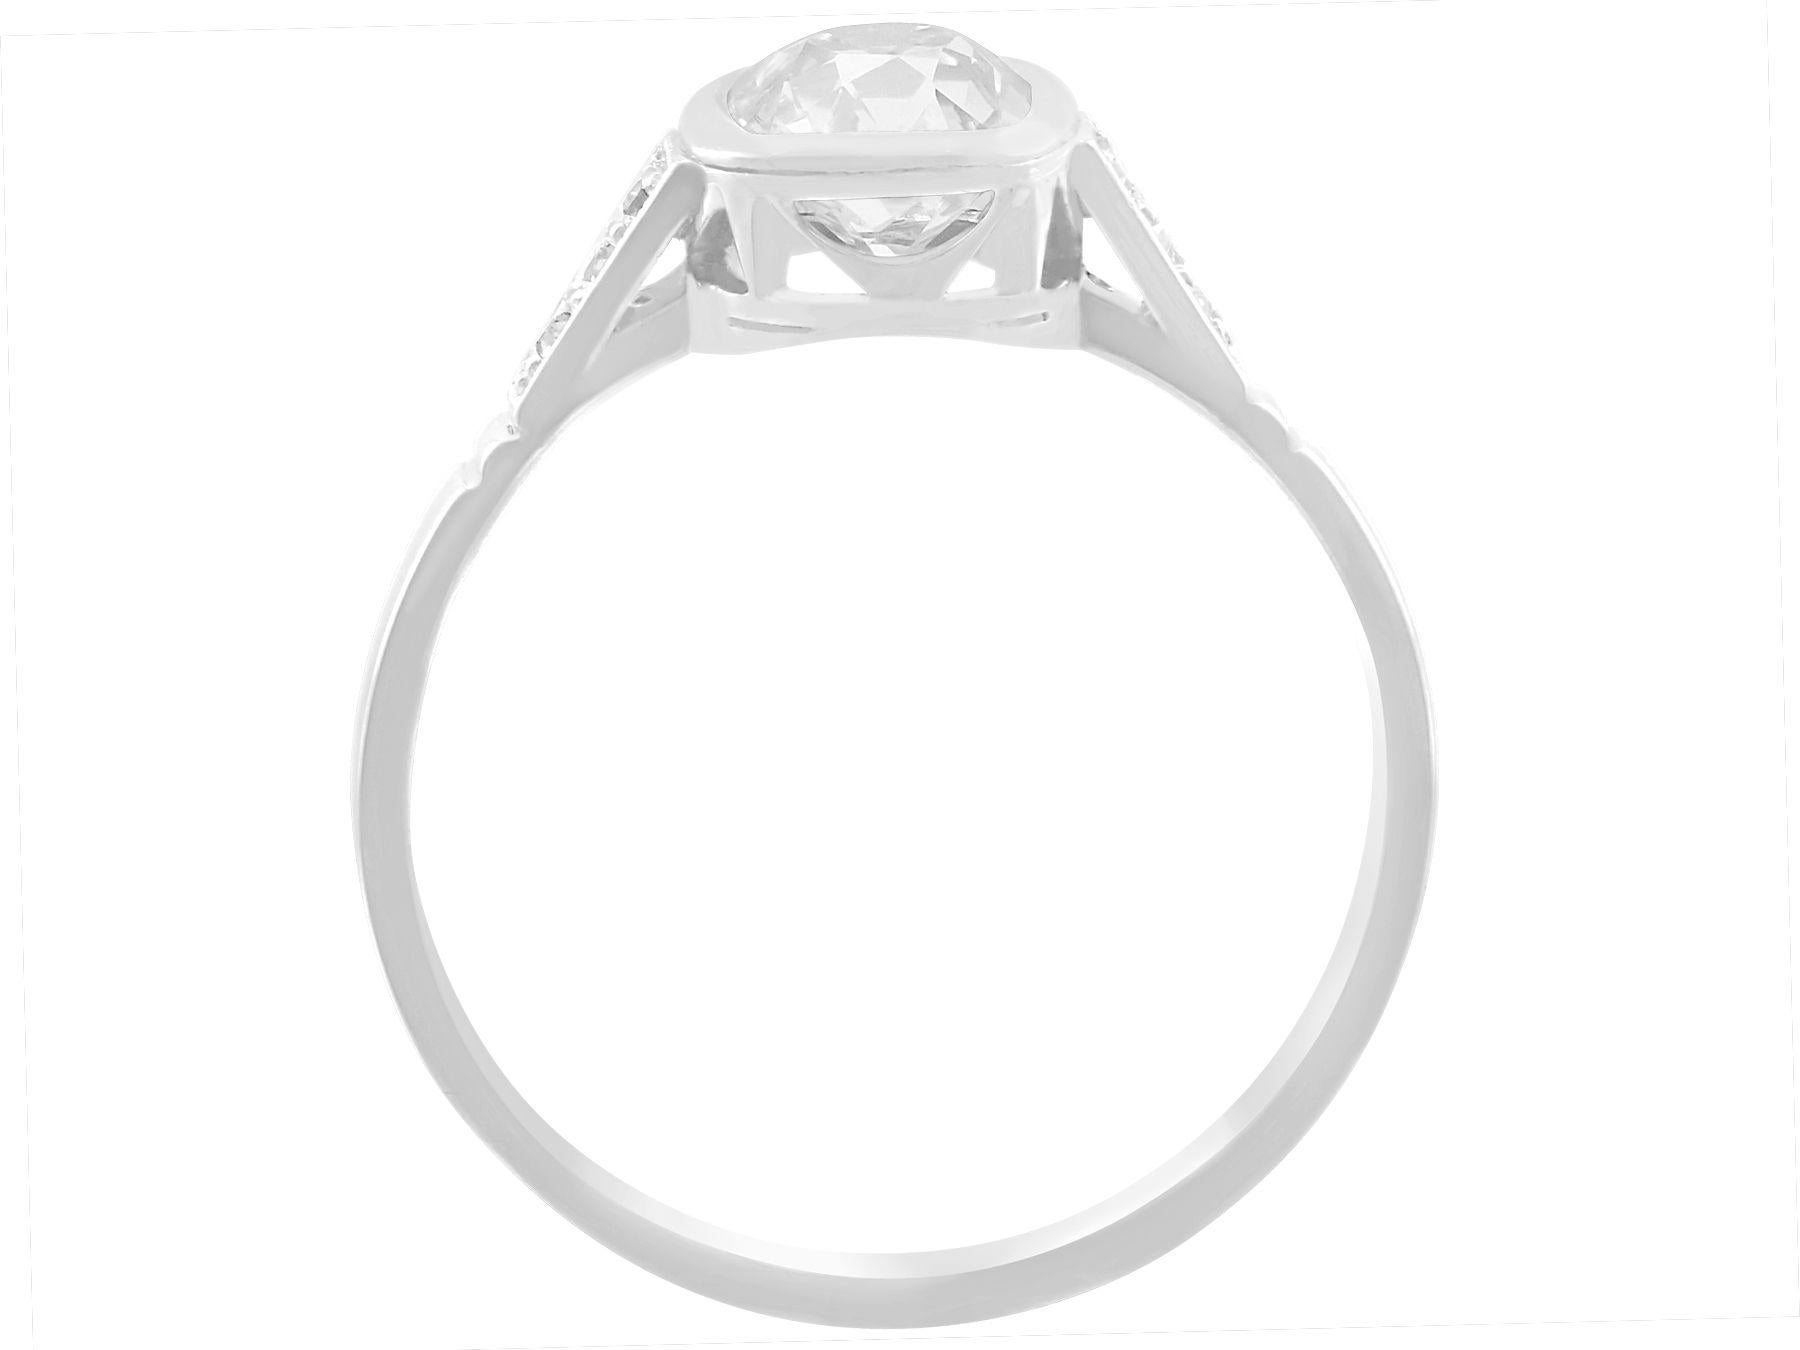 Antique 1.07 Carat Diamond and White Gold Solitaire Ring In Excellent Condition For Sale In Jesmond, Newcastle Upon Tyne